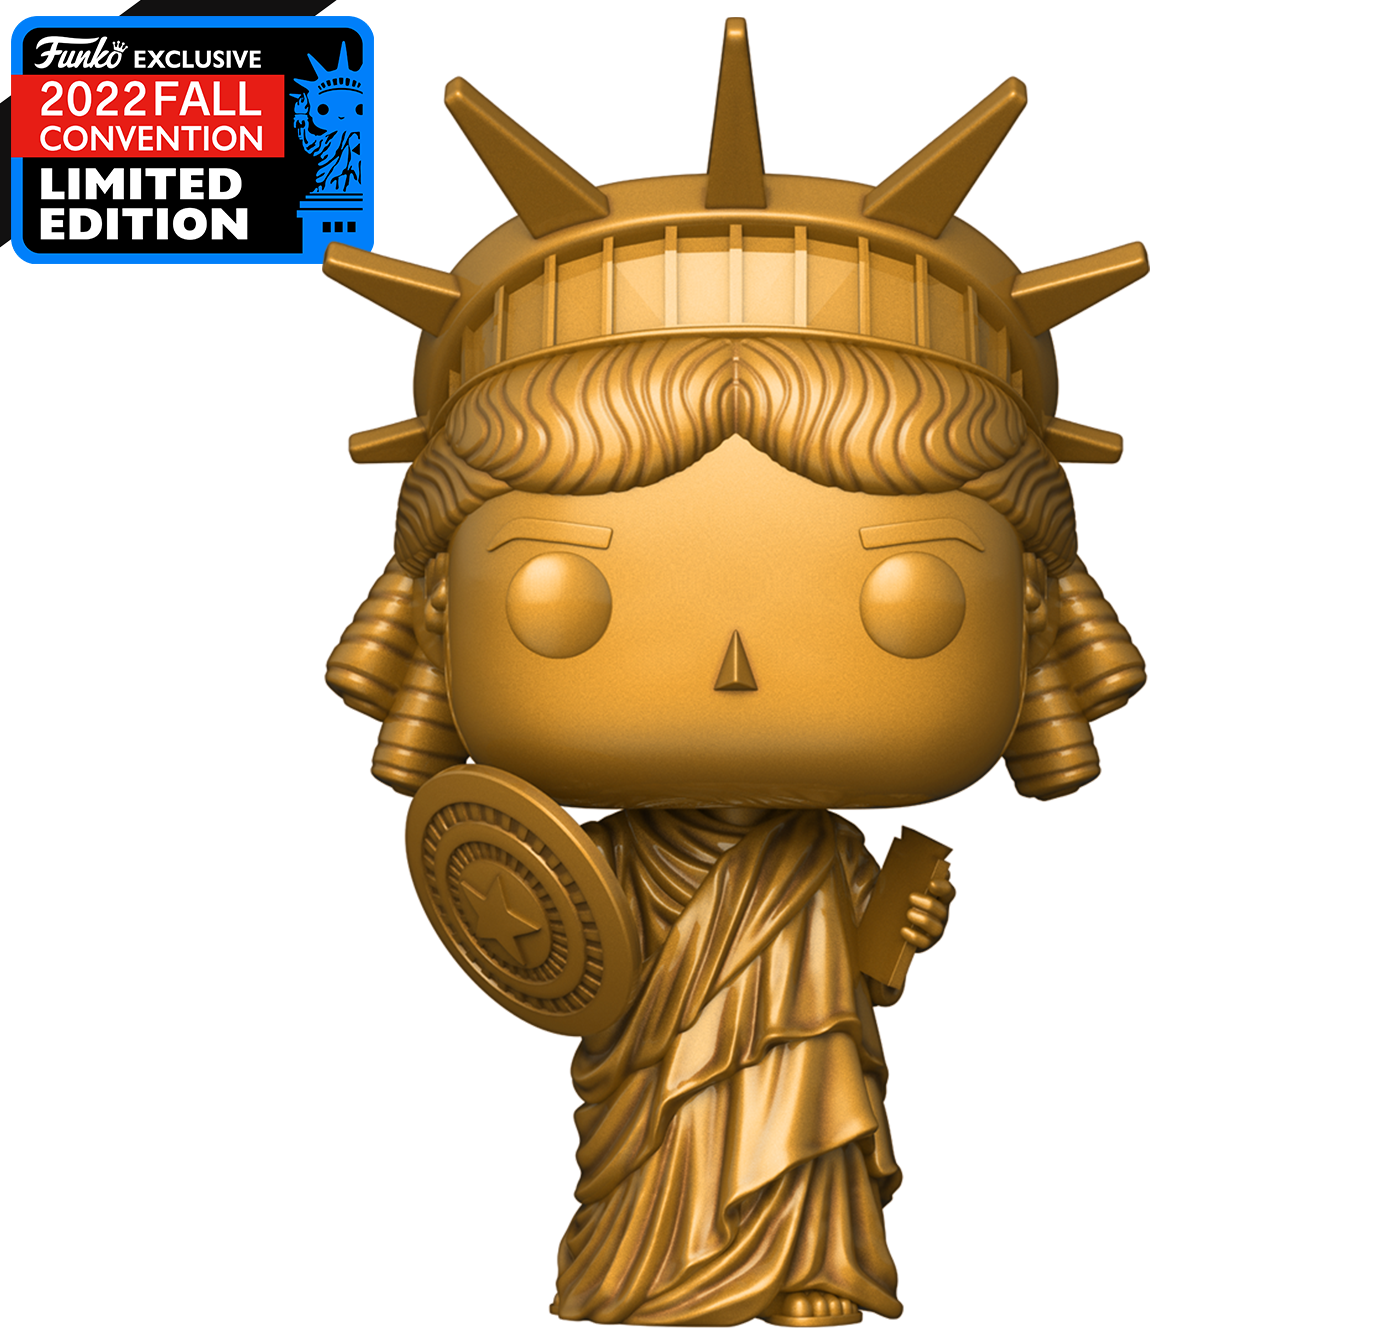 Spiderman: No Way Home - Statue of Liberty - NYCC 2022 Fall Convention Exclusive Pop! Vinyl